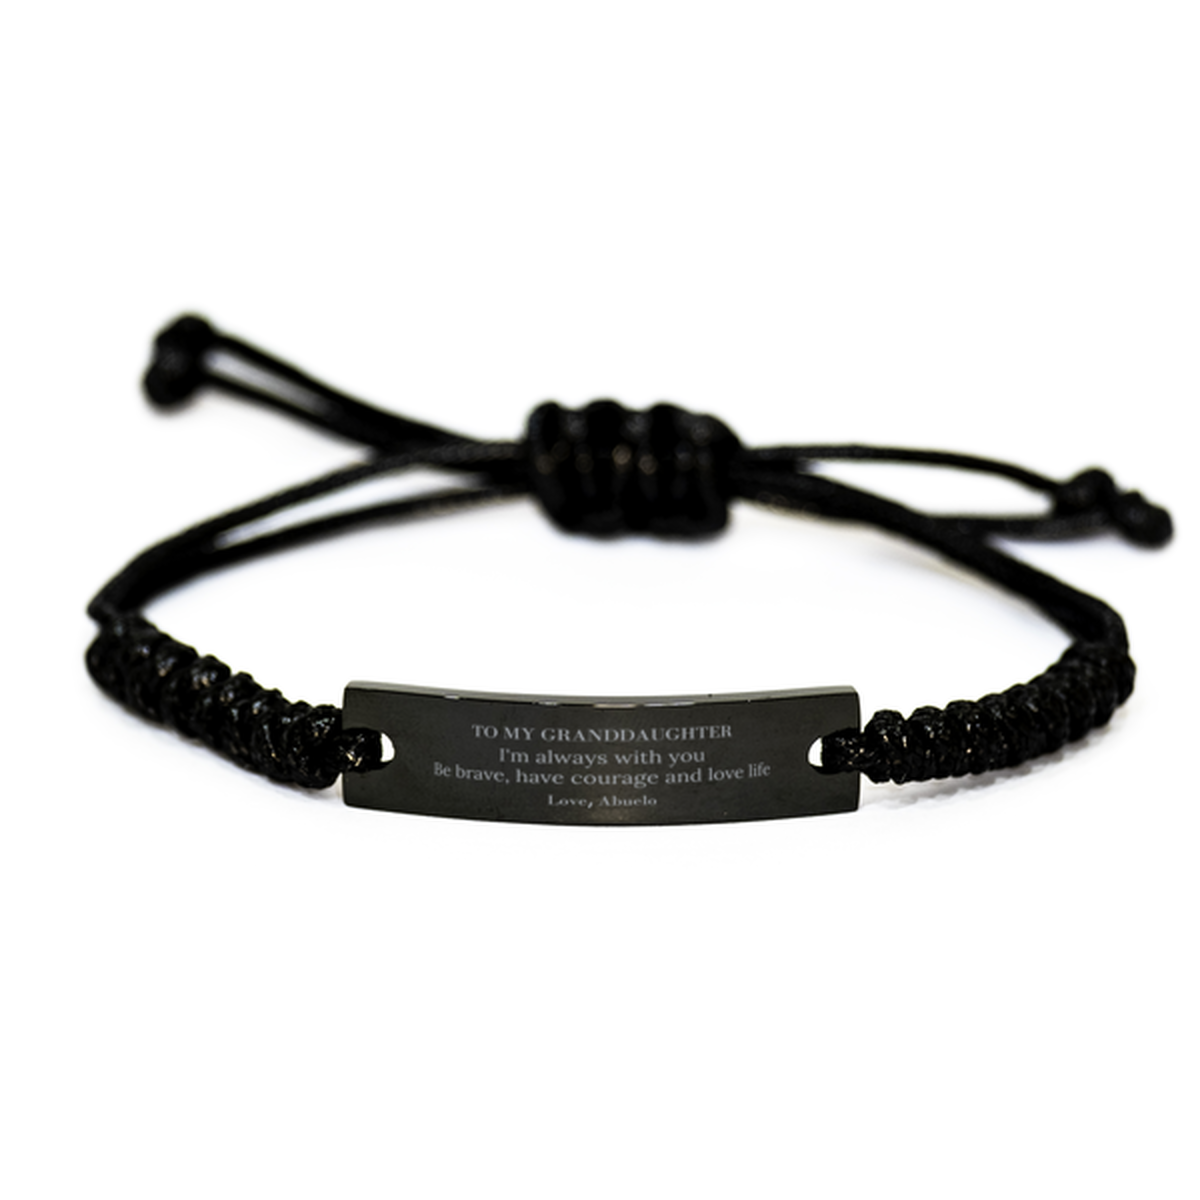 To My Granddaughter Gifts from Abuelo, Unique Black Rope Bracelet Inspirational Christmas Birthday Graduation Gifts for Granddaughter I'm always with you. Be brave, have courage and love life. Love, Abuelo